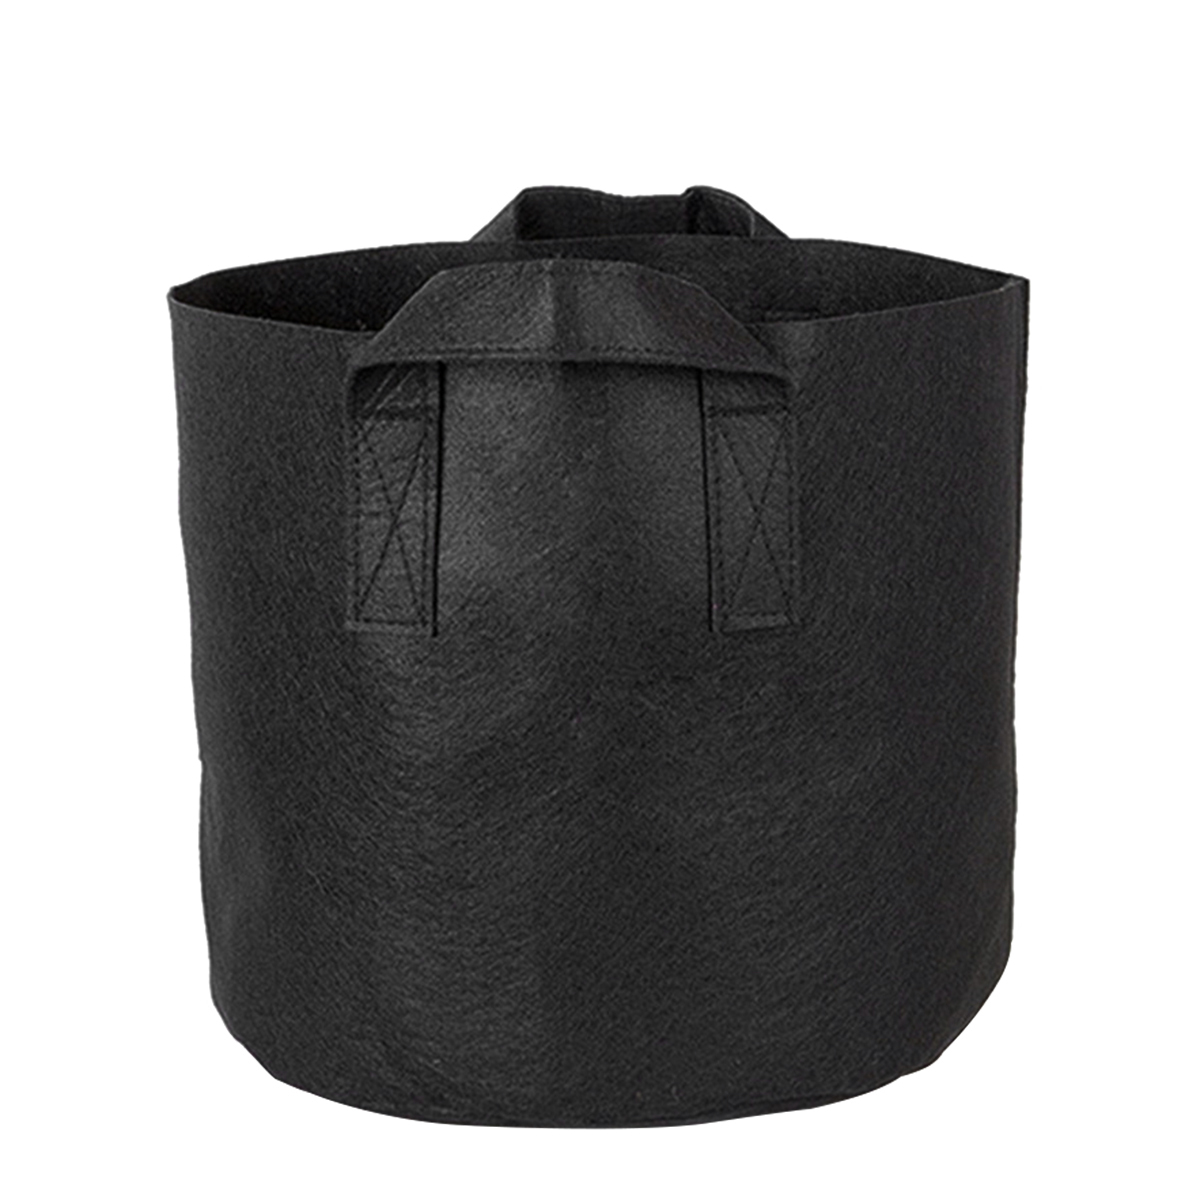 Non-woven-Fabric-Planting-Grow-Box-Vegetable-Flower-Pots-Bag-Planter-Black-with-Handles-1678096-8